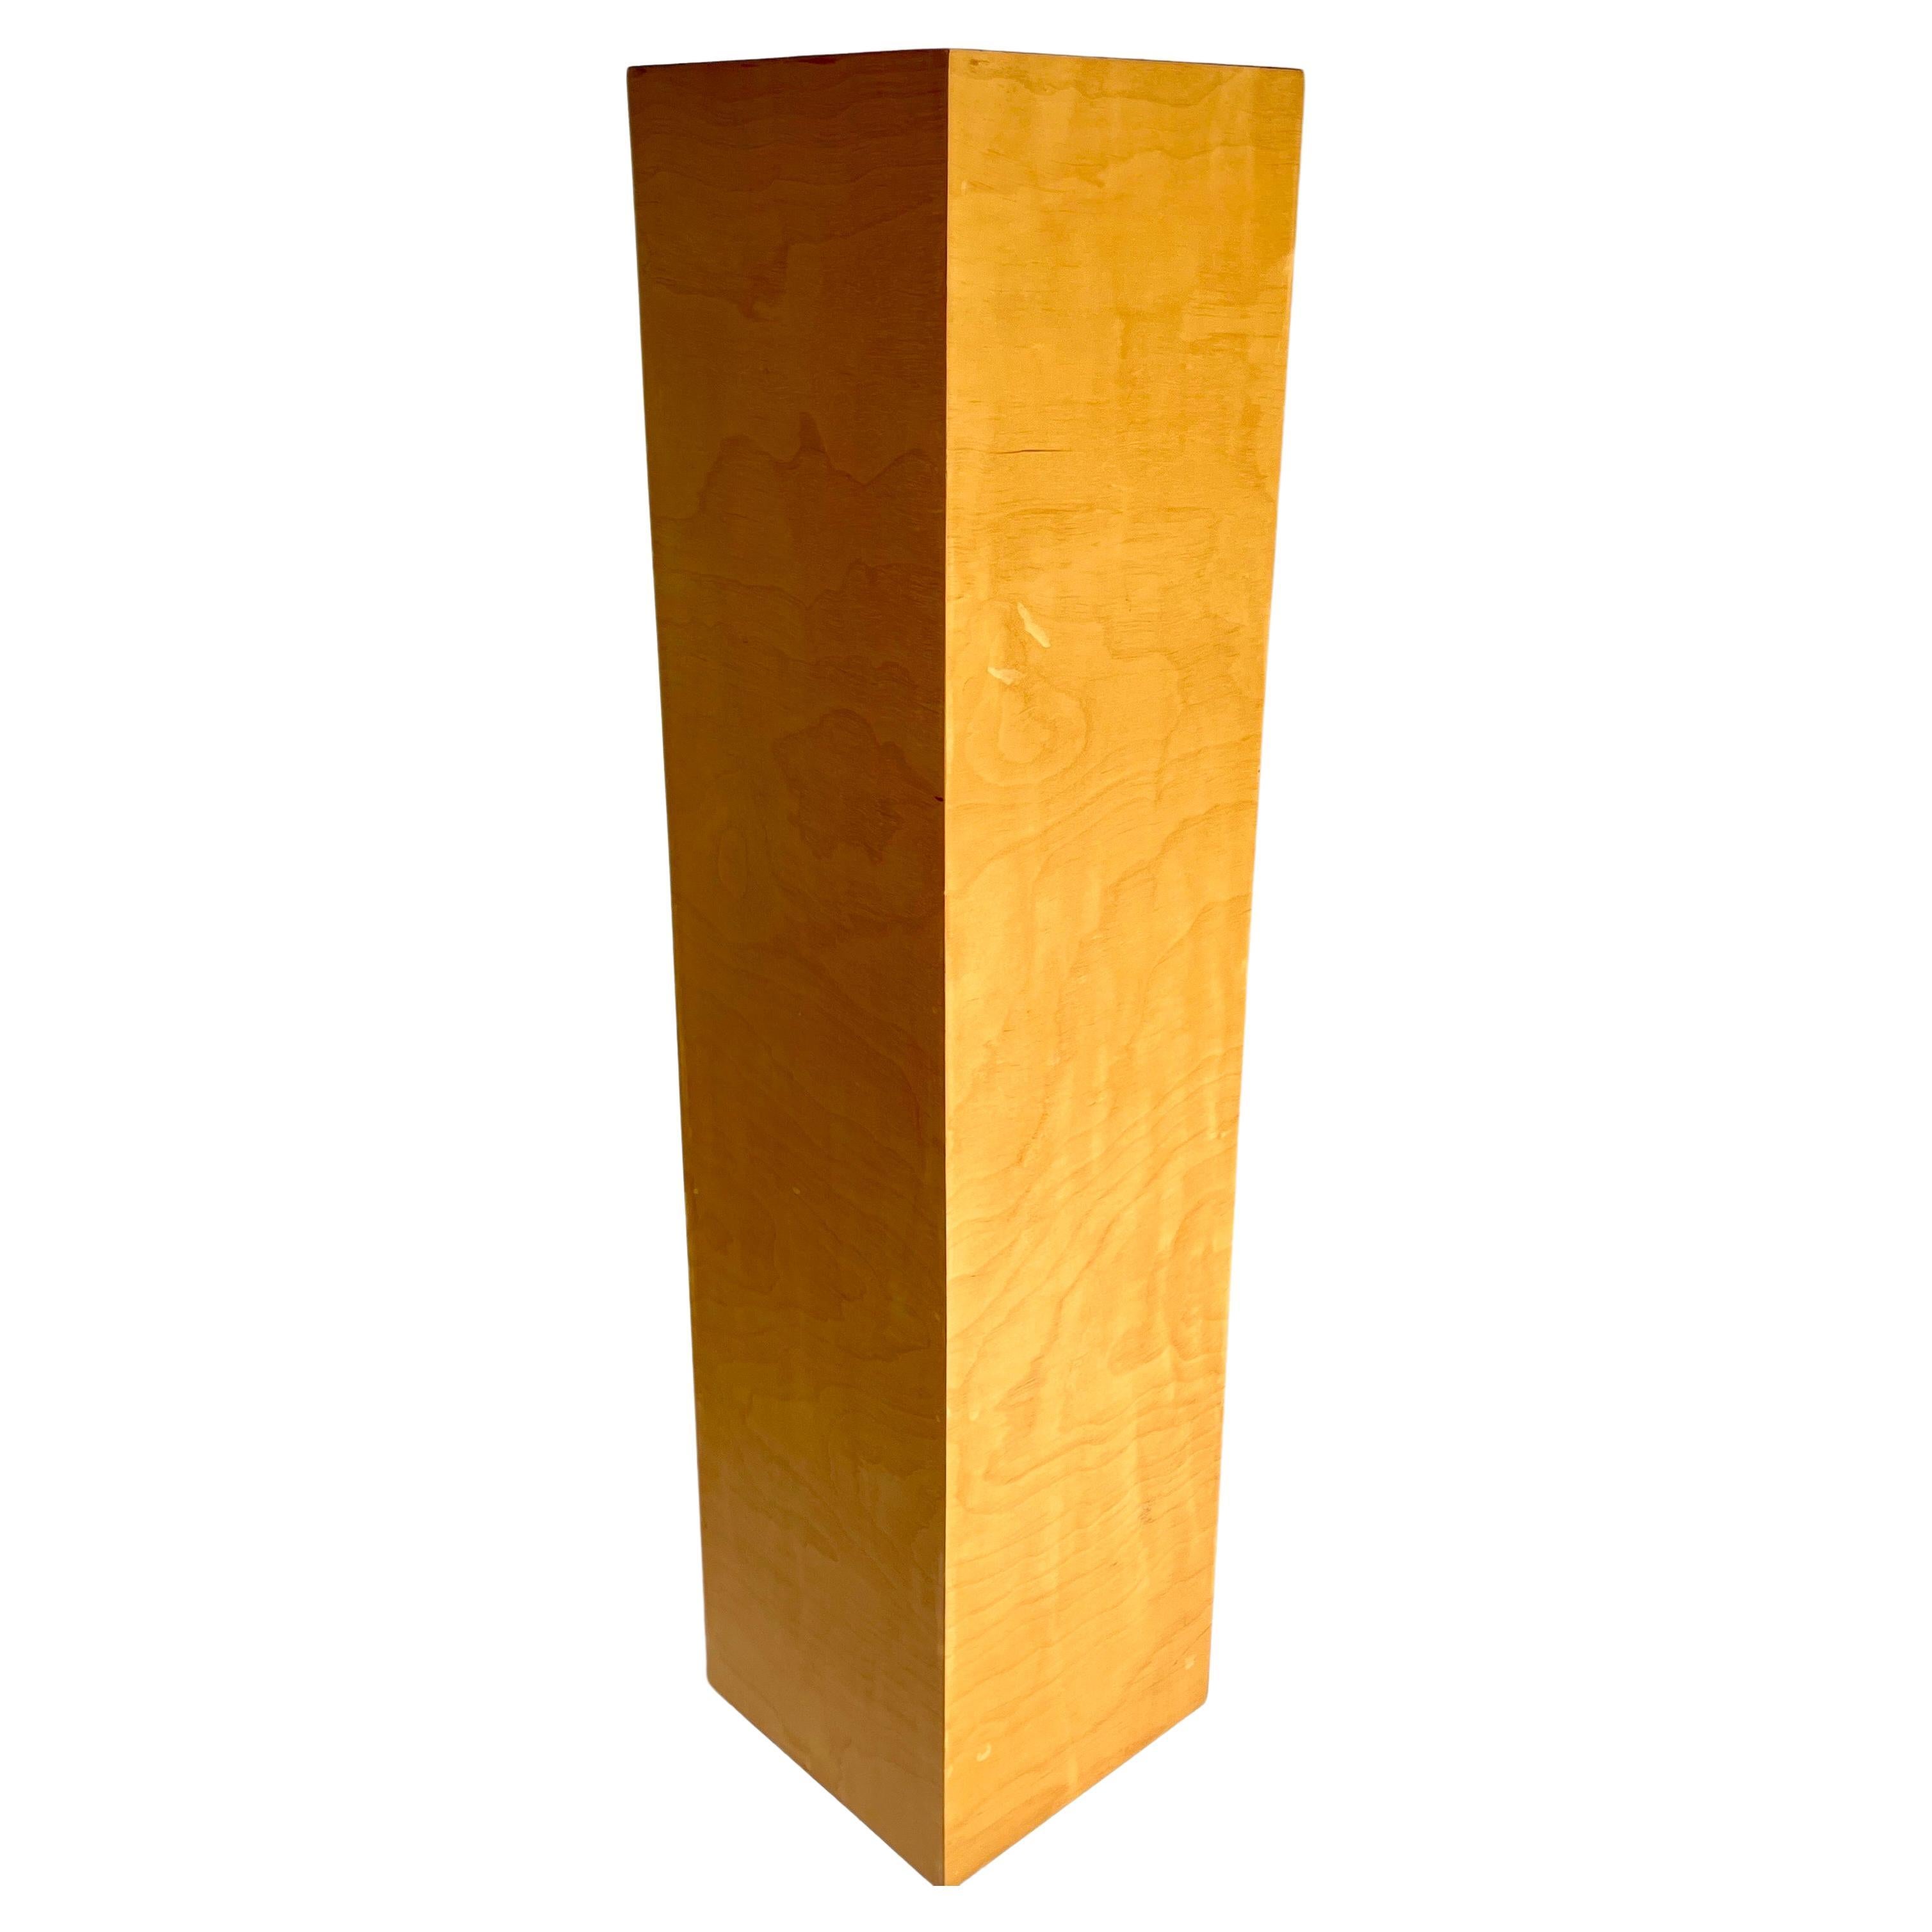 Late 20th Century Light Colored Veneer Wood Pedestal For Sale 1